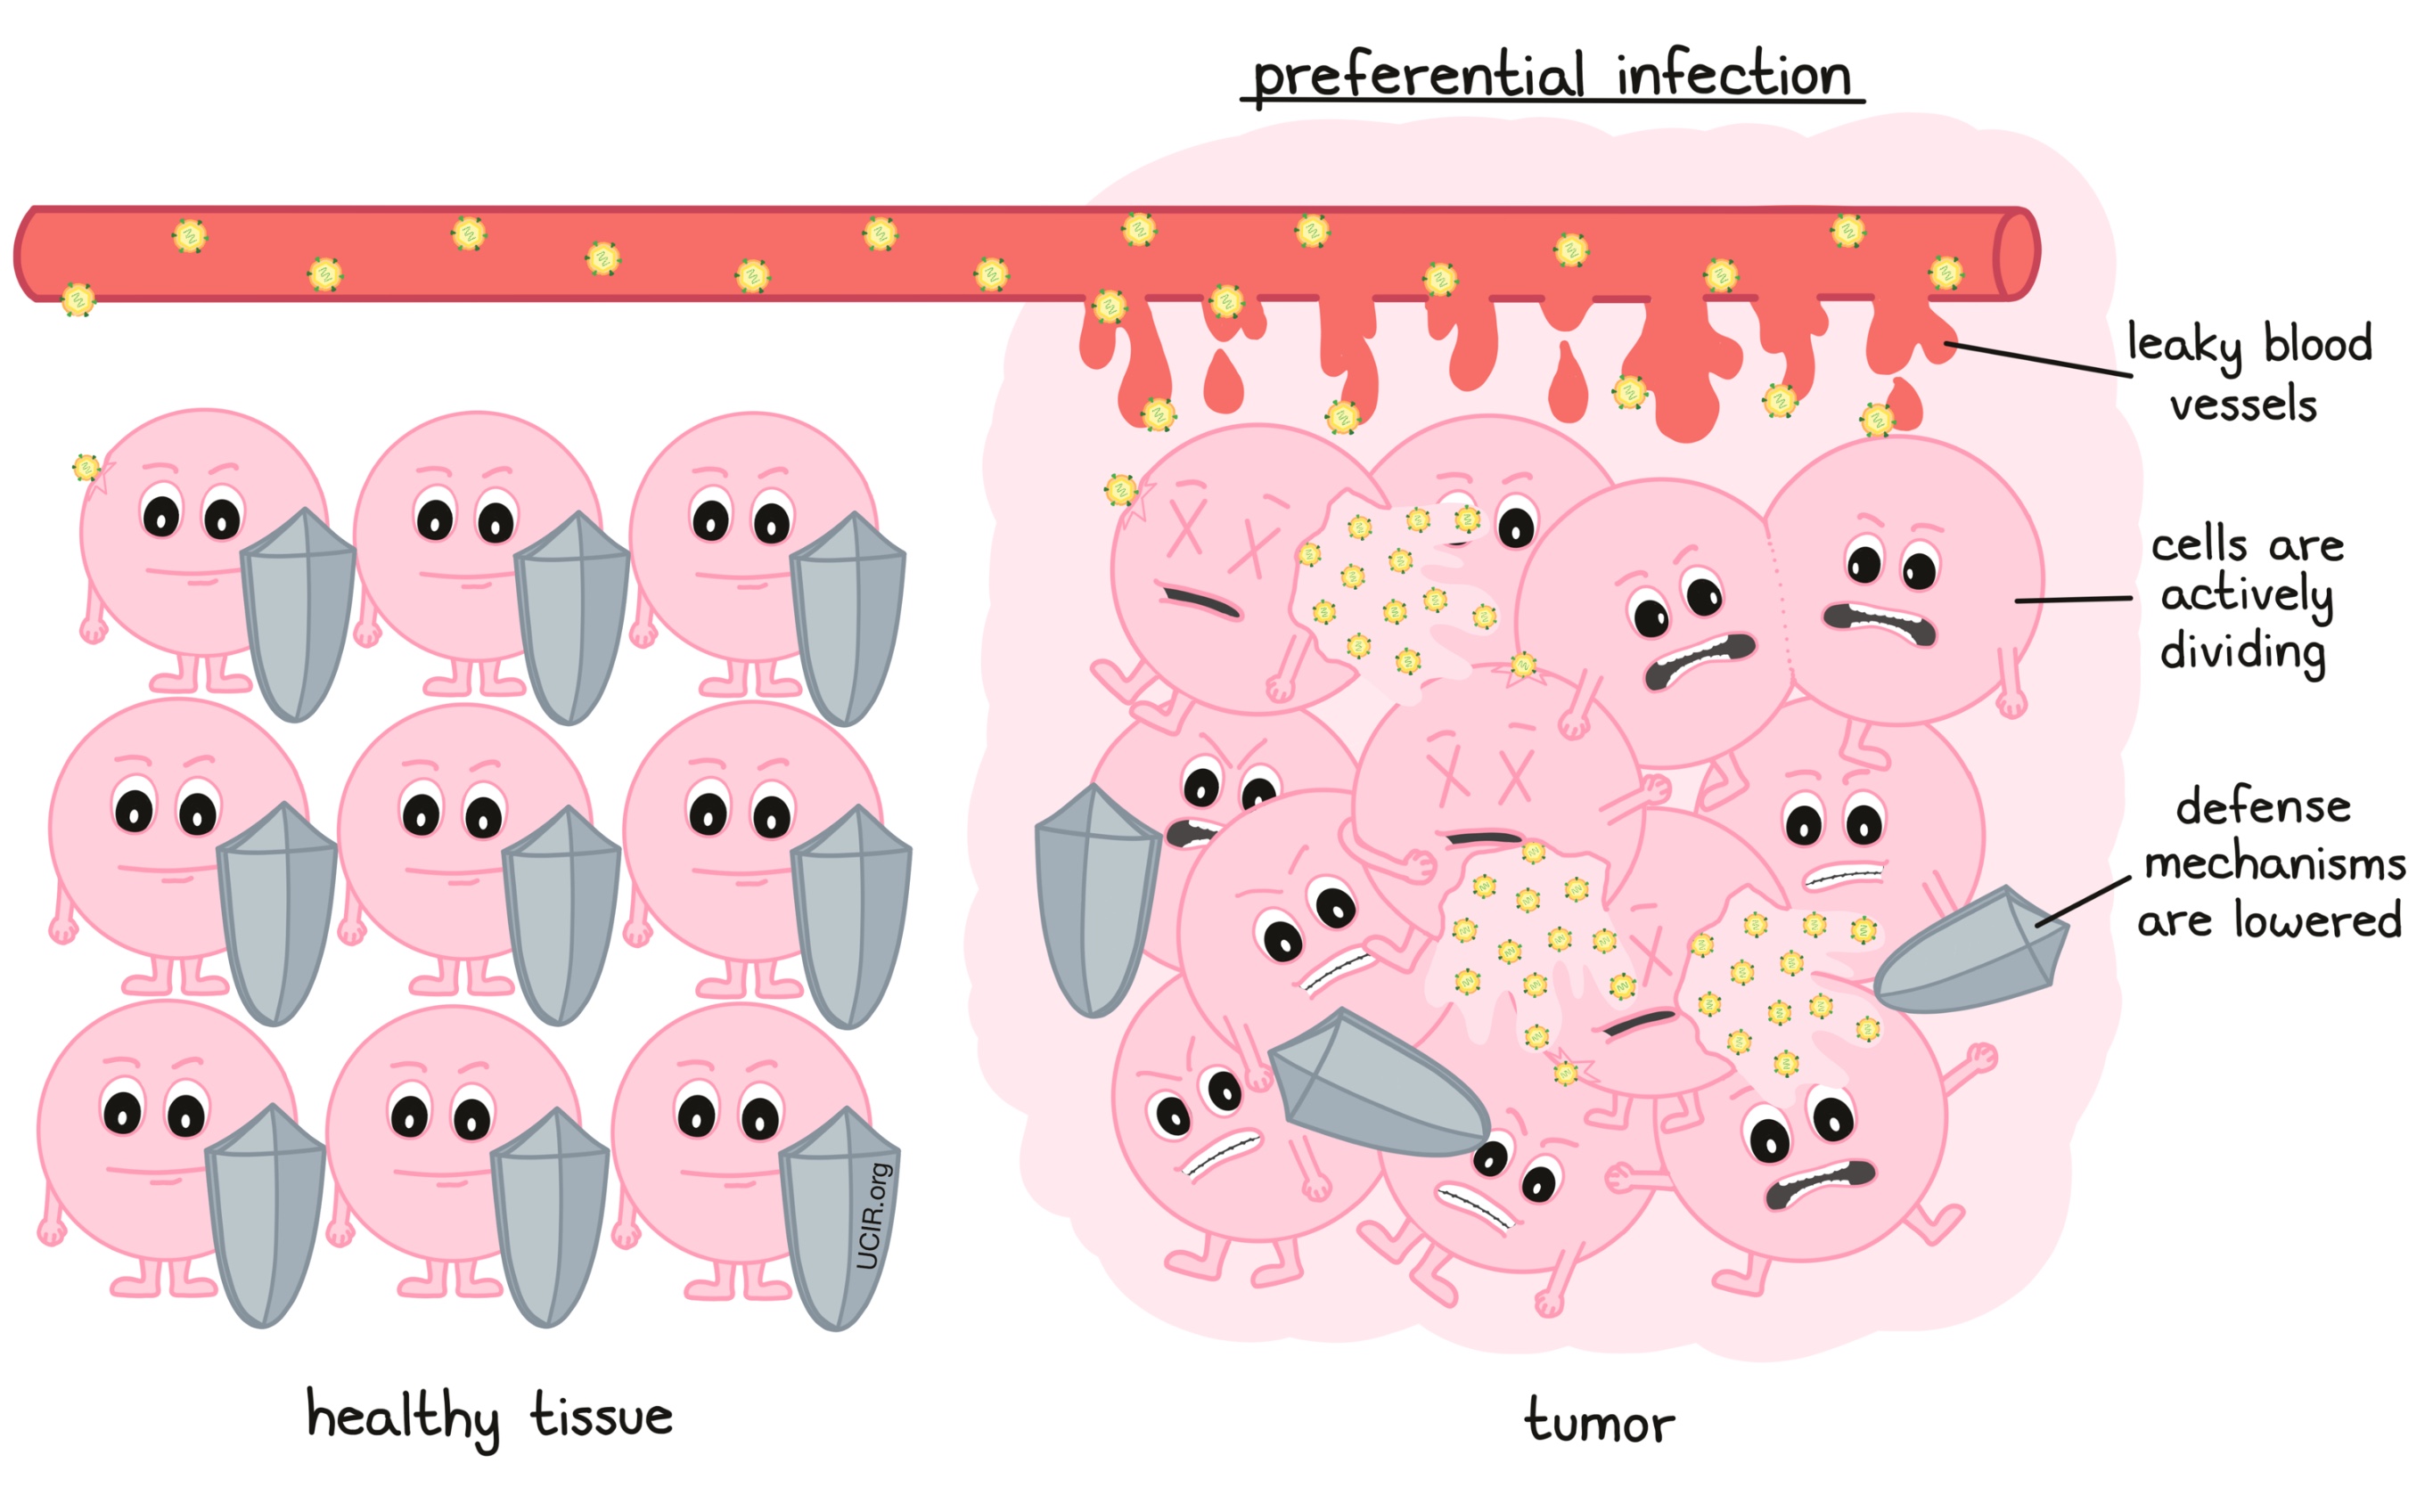 Preferential infection image